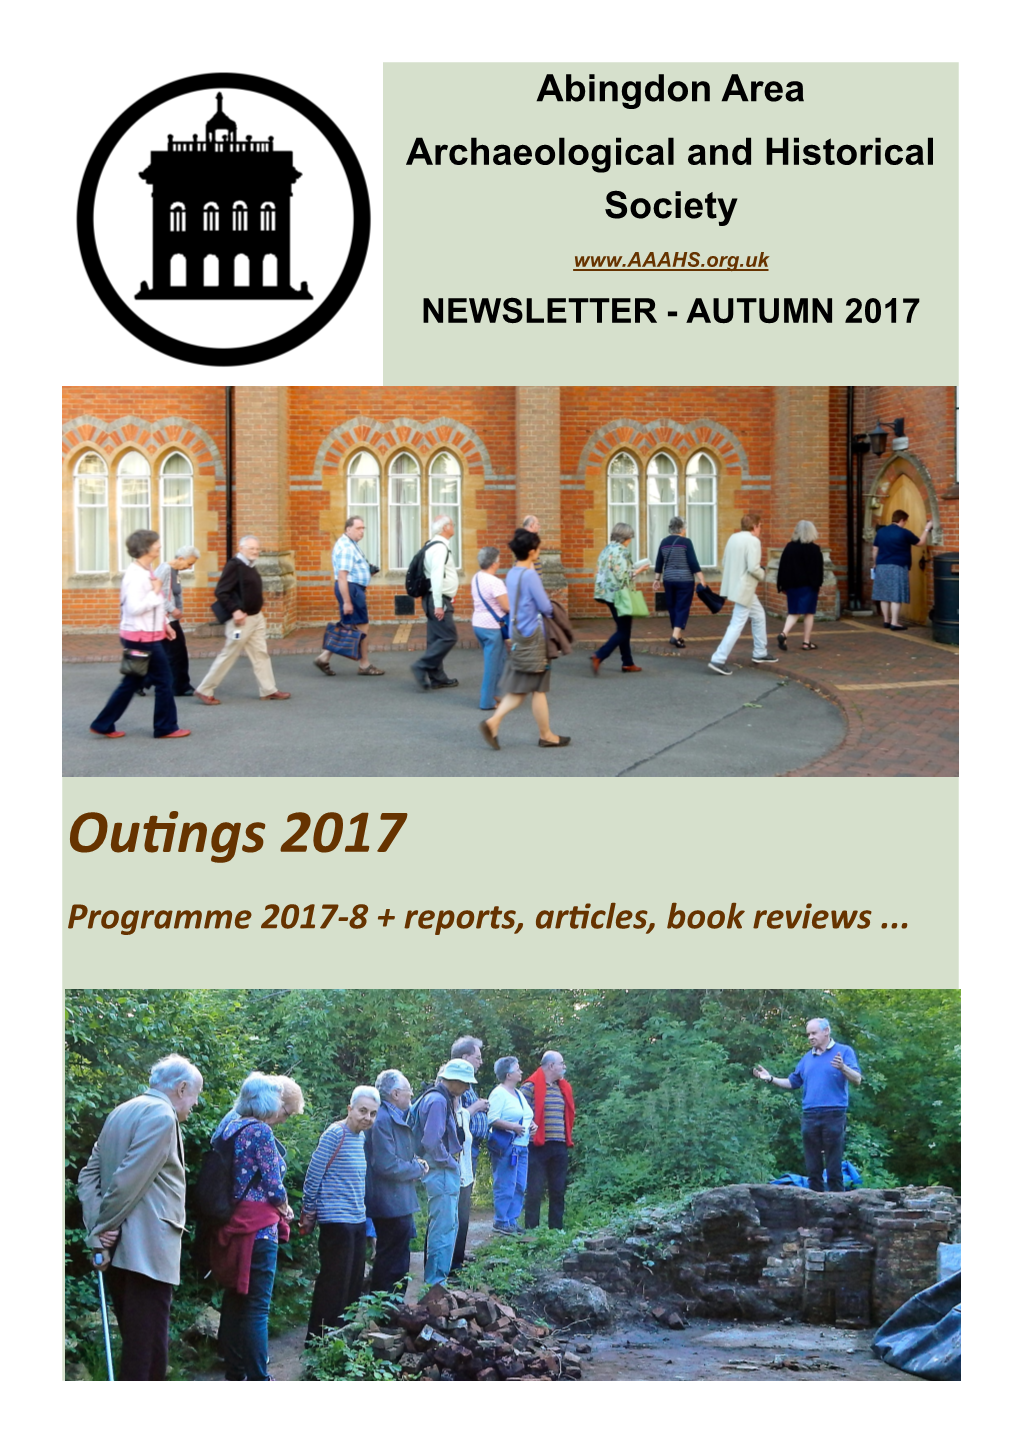 Outings 2017 Programme 2017-8 + Reports, Articles, Book Reviews